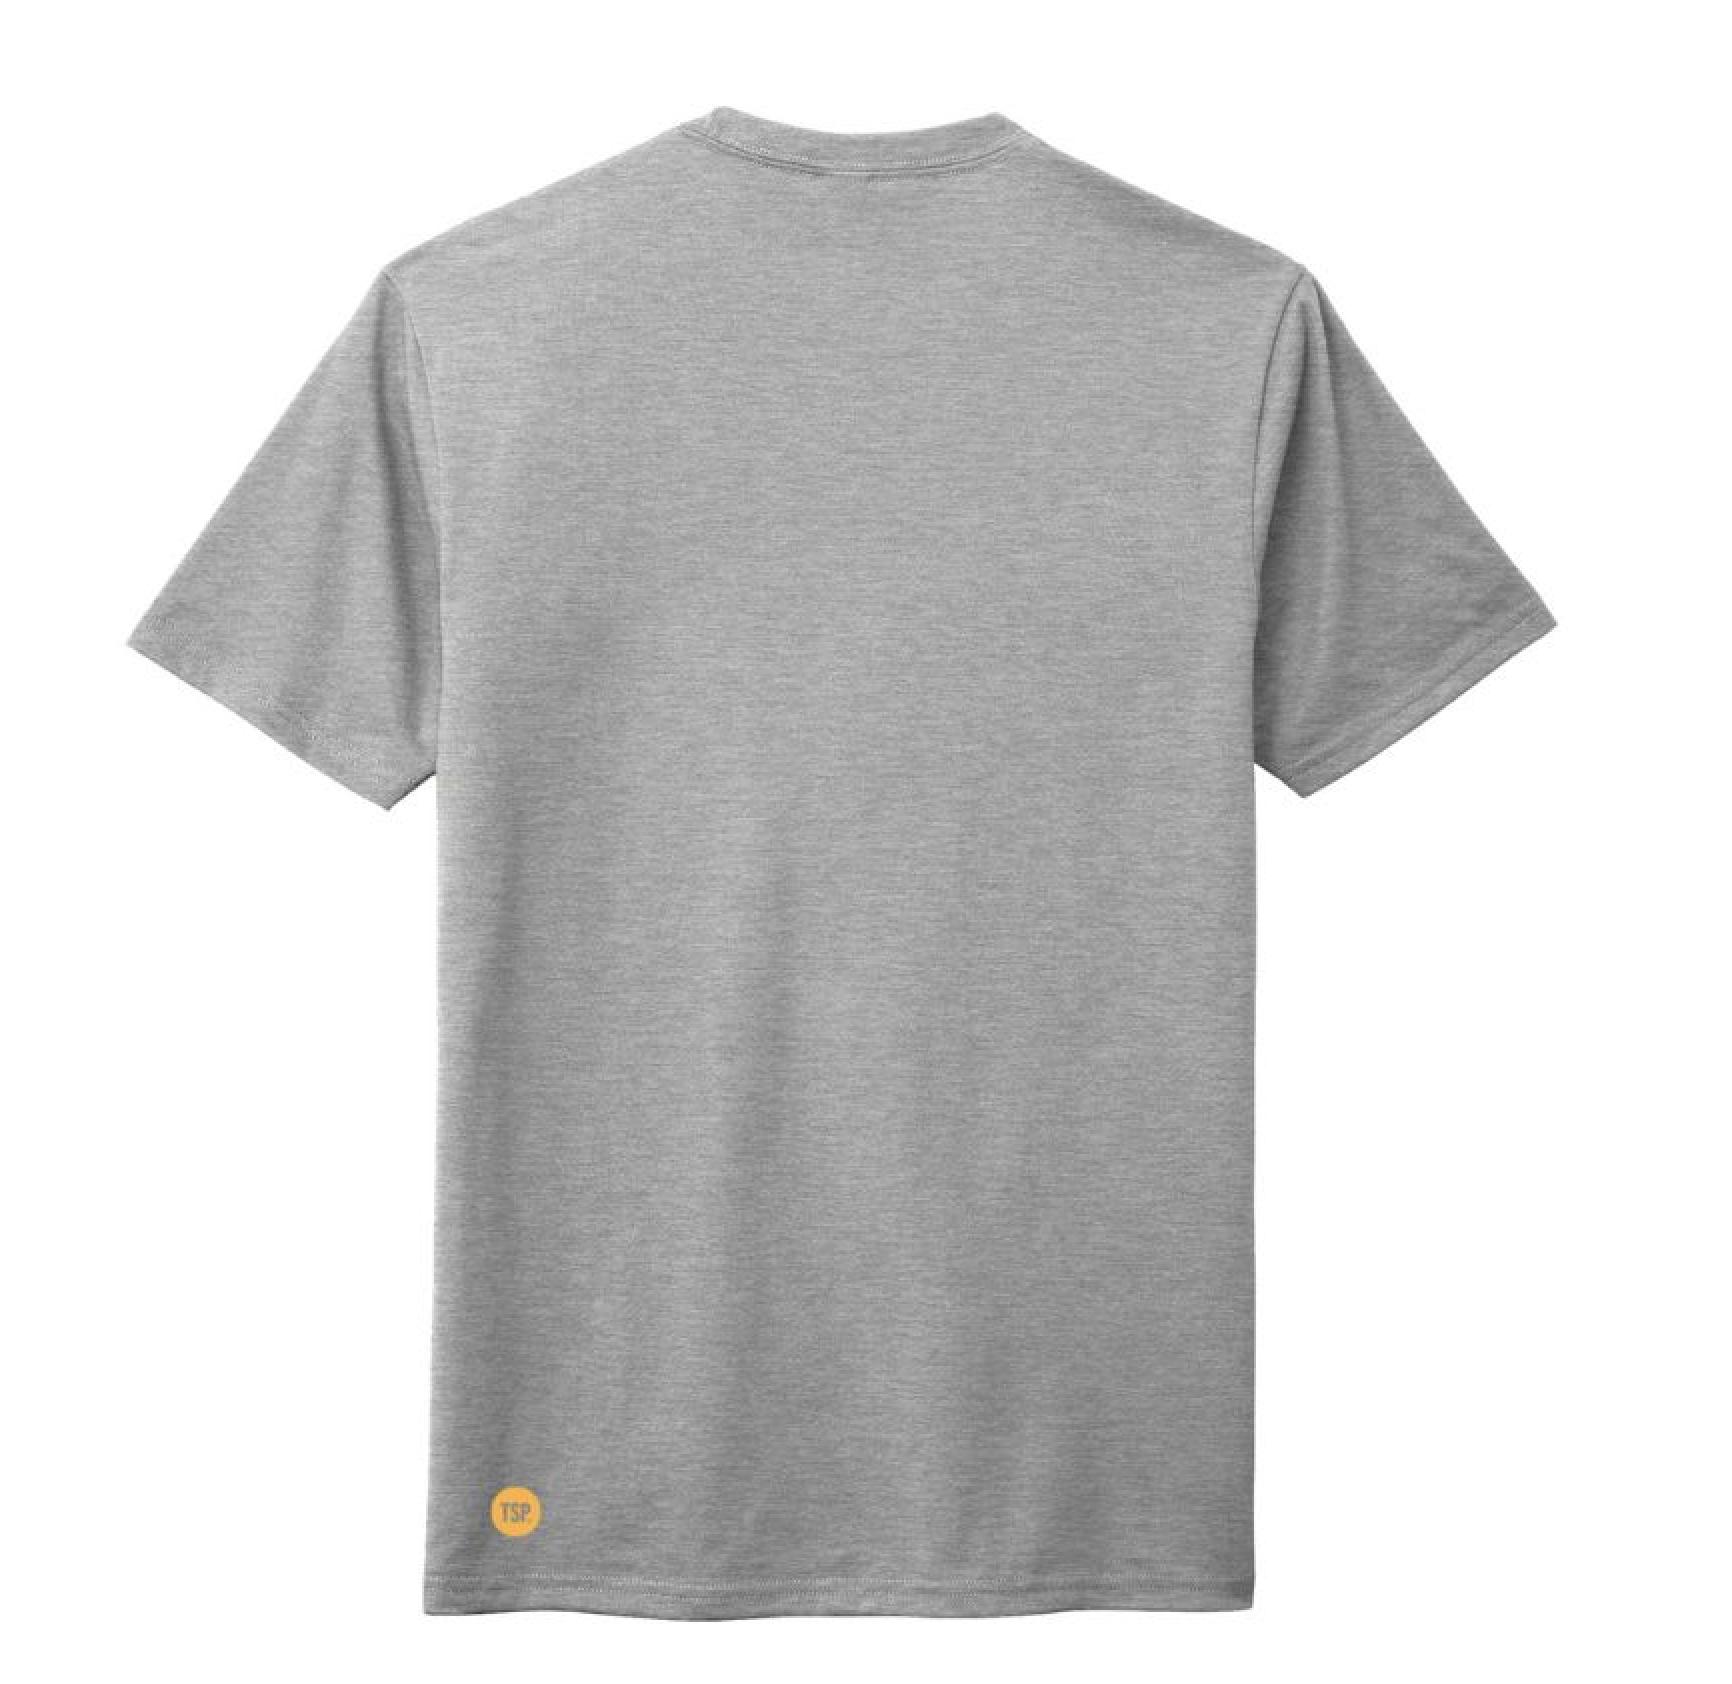 buy grey tshirt online in canada from the sourdough people